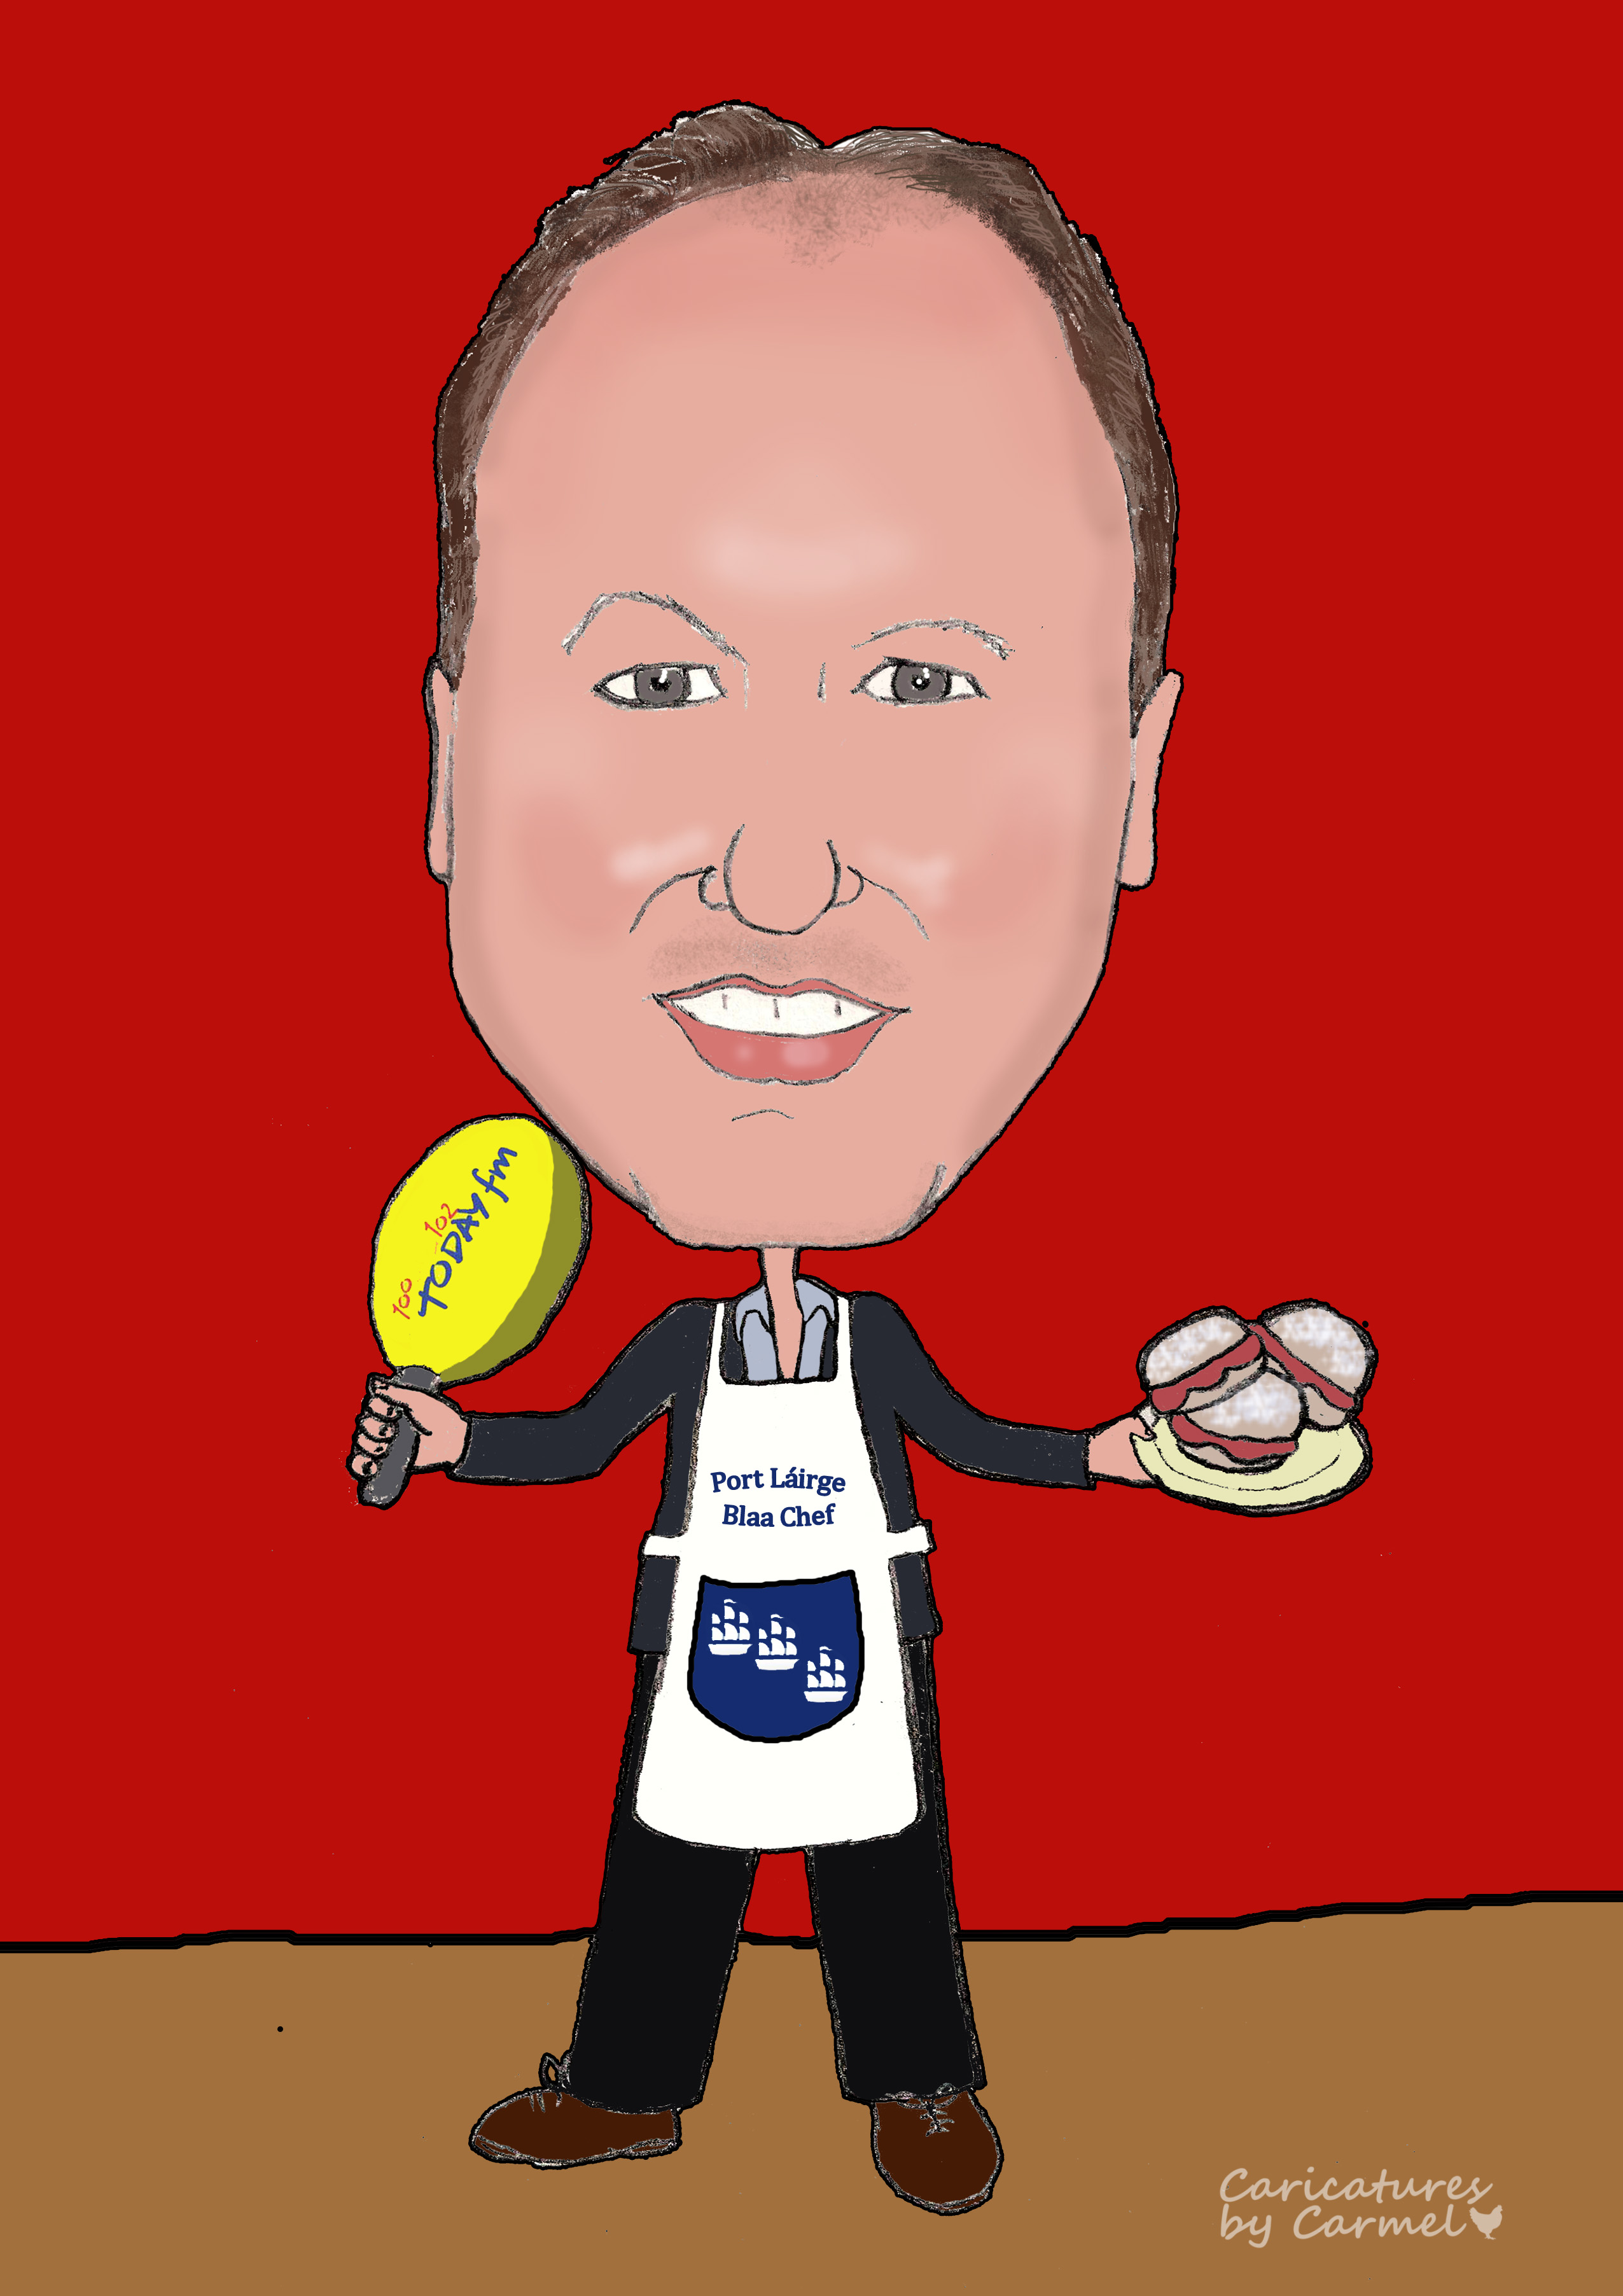 The caricature I created at home with Tony Fenton and a plate full of blaas and red lead. (Waterford people will understand that, lol)